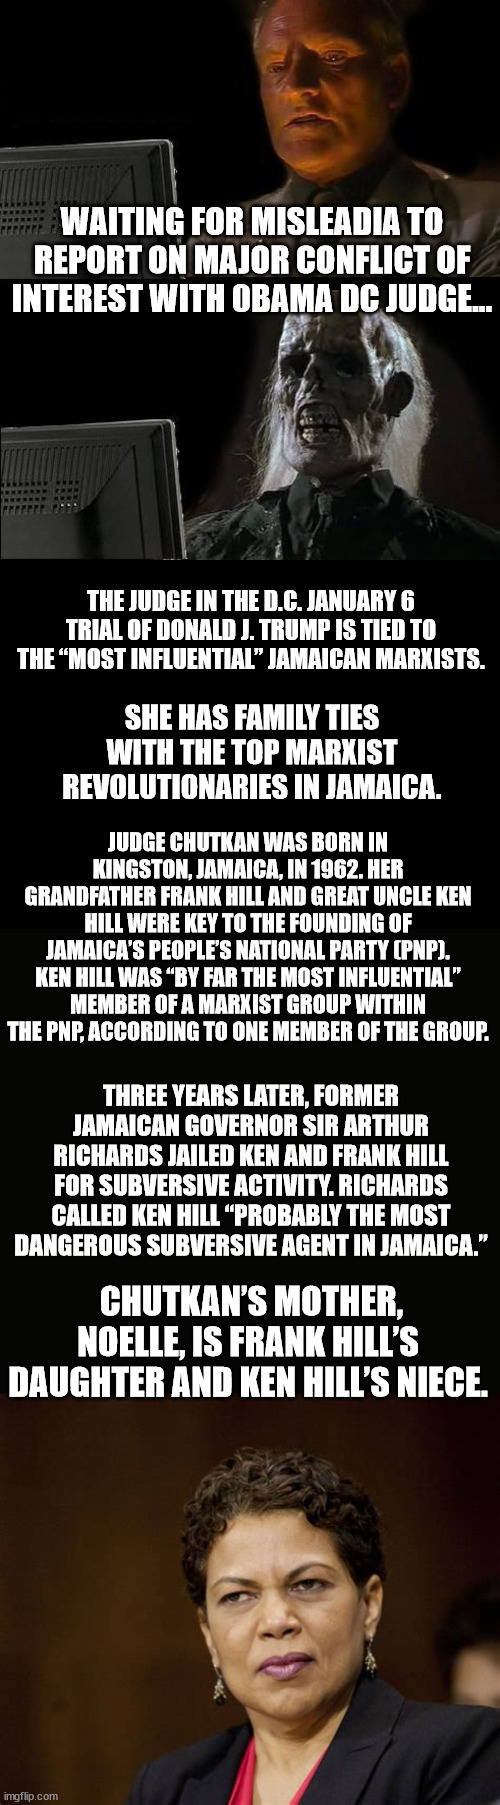 Biased judge needs to recuse themselves... | WAITING FOR MISLEADIA TO REPORT ON MAJOR CONFLICT OF INTEREST WITH 0BAMA DC JUDGE... THE JUDGE IN THE D.C. JANUARY 6 TRIAL OF DONALD J. TRUMP IS TIED TO THE “MOST INFLUENTIAL” JAMAICAN MARXISTS. SHE HAS FAMILY TIES WITH THE TOP MARXIST REVOLUTIONARIES IN JAMAICA. JUDGE CHUTKAN WAS BORN IN KINGSTON, JAMAICA, IN 1962. HER GRANDFATHER FRANK HILL AND GREAT UNCLE KEN HILL WERE KEY TO THE FOUNDING OF JAMAICA’S PEOPLE’S NATIONAL PARTY (PNP). KEN HILL WAS “BY FAR THE MOST INFLUENTIAL” MEMBER OF A MARXIST GROUP WITHIN THE PNP, ACCORDING TO ONE MEMBER OF THE GROUP. THREE YEARS LATER, FORMER JAMAICAN GOVERNOR SIR ARTHUR RICHARDS JAILED KEN AND FRANK HILL FOR SUBVERSIVE ACTIVITY. RICHARDS CALLED KEN HILL “PROBABLY THE MOST DANGEROUS SUBVERSIVE AGENT IN JAMAICA.”; CHUTKAN’S MOTHER, NOELLE, IS FRANK HILL’S DAUGHTER AND KEN HILL’S NIECE. | image tagged in memes,i'll just wait here,blank black,communist,judge | made w/ Imgflip meme maker